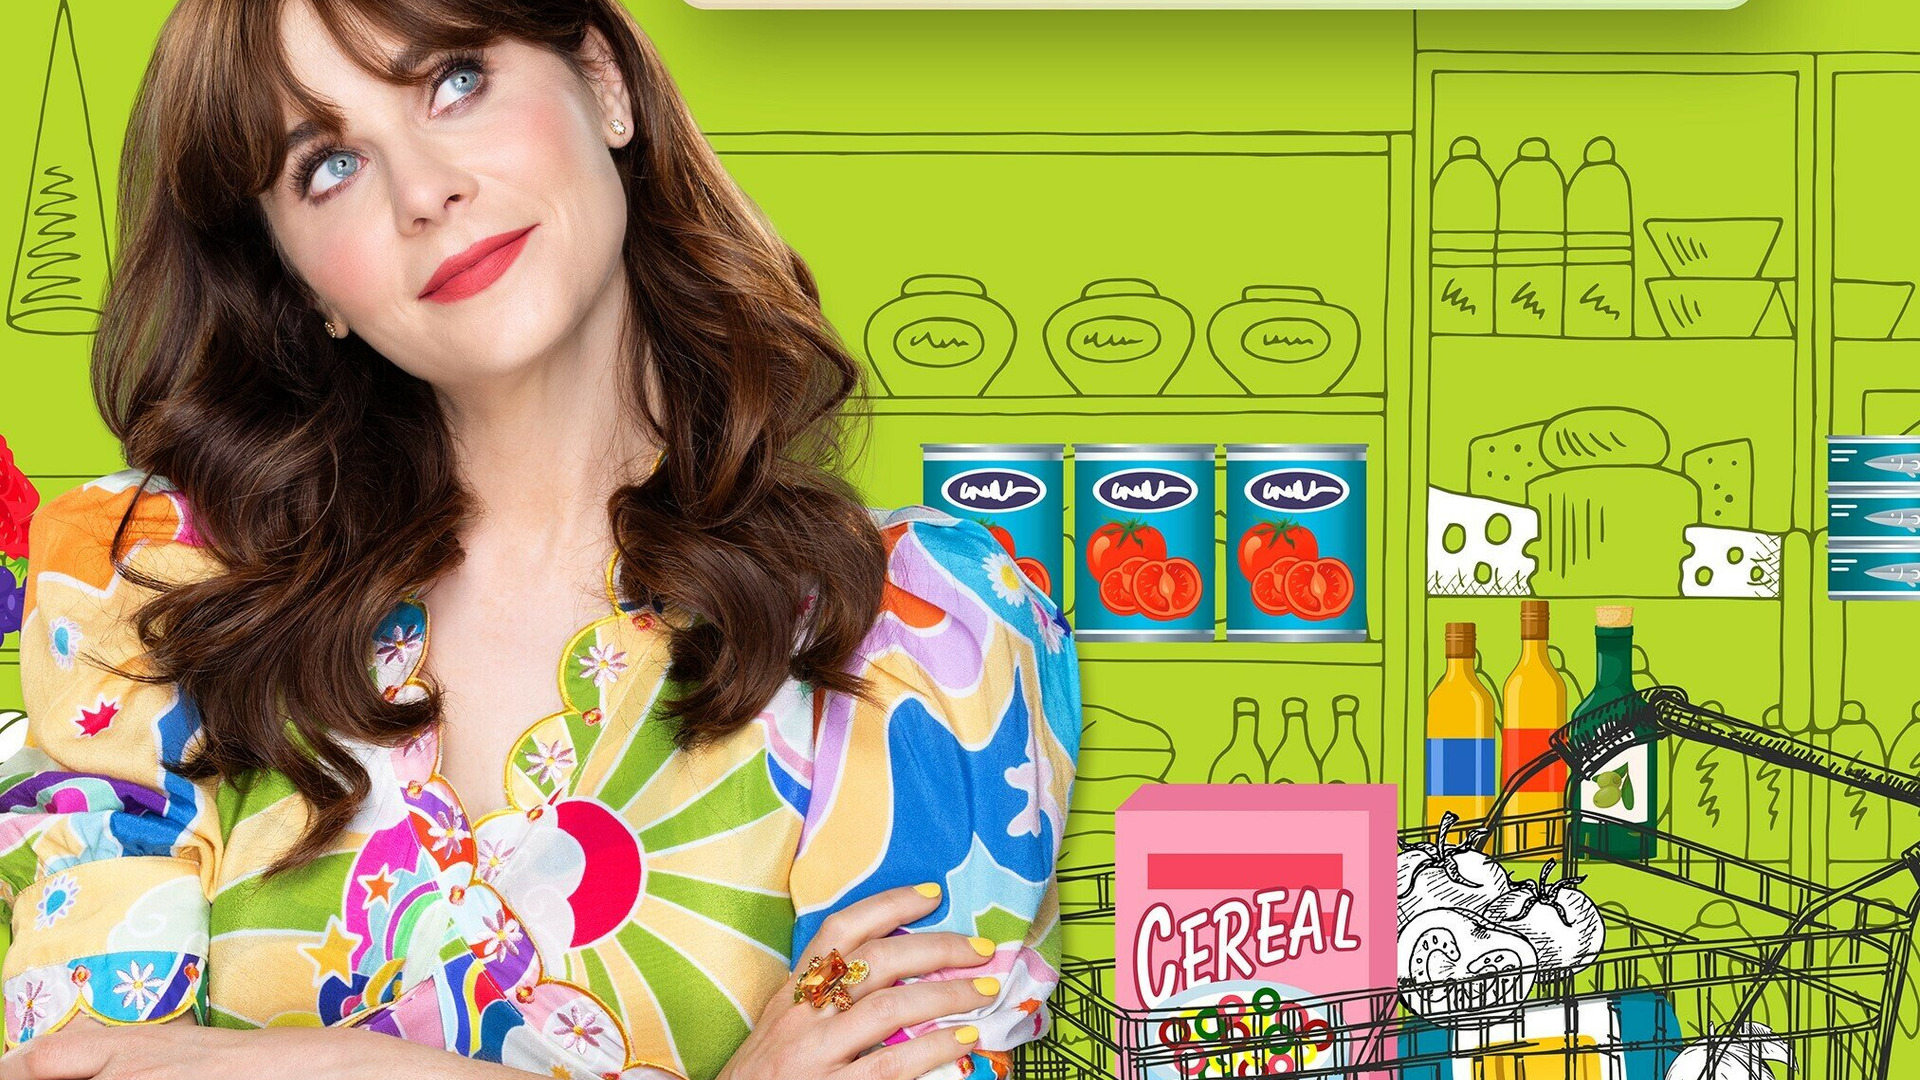 Show What Am I Eating? with Zooey Deschanel